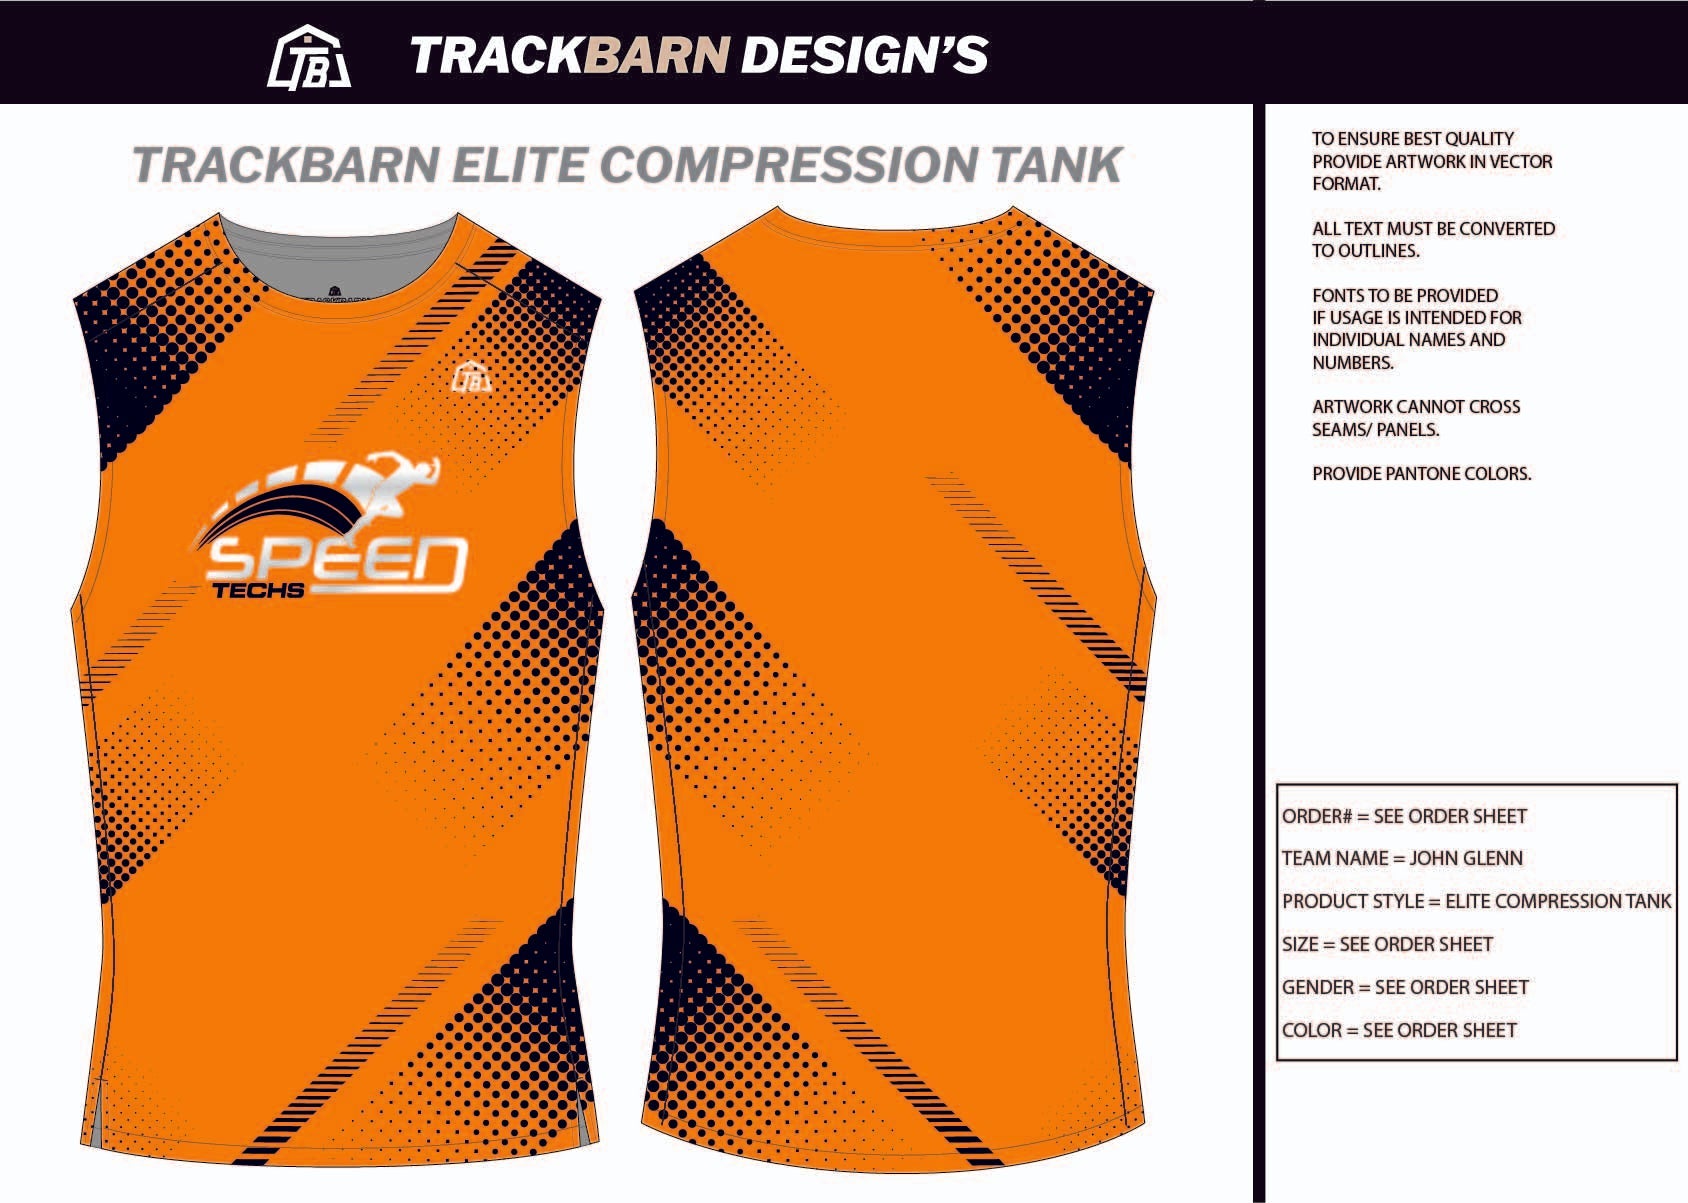 Speed-Techs- Youth Compression Tank